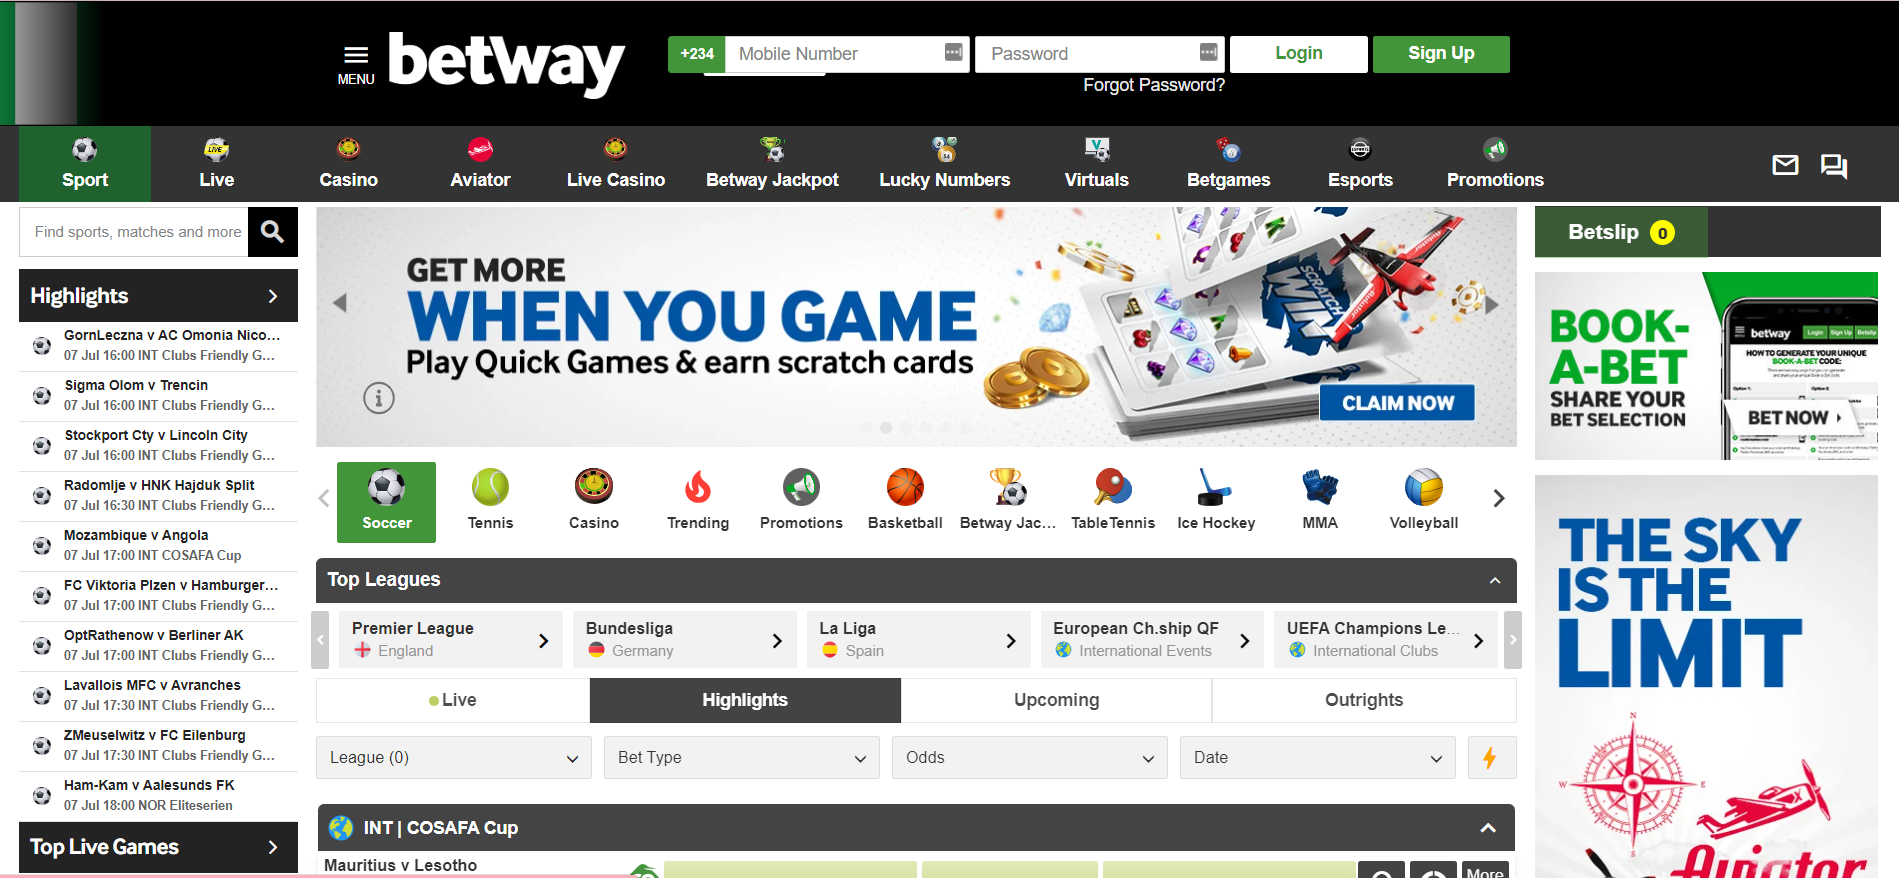 Betway Customer Support page